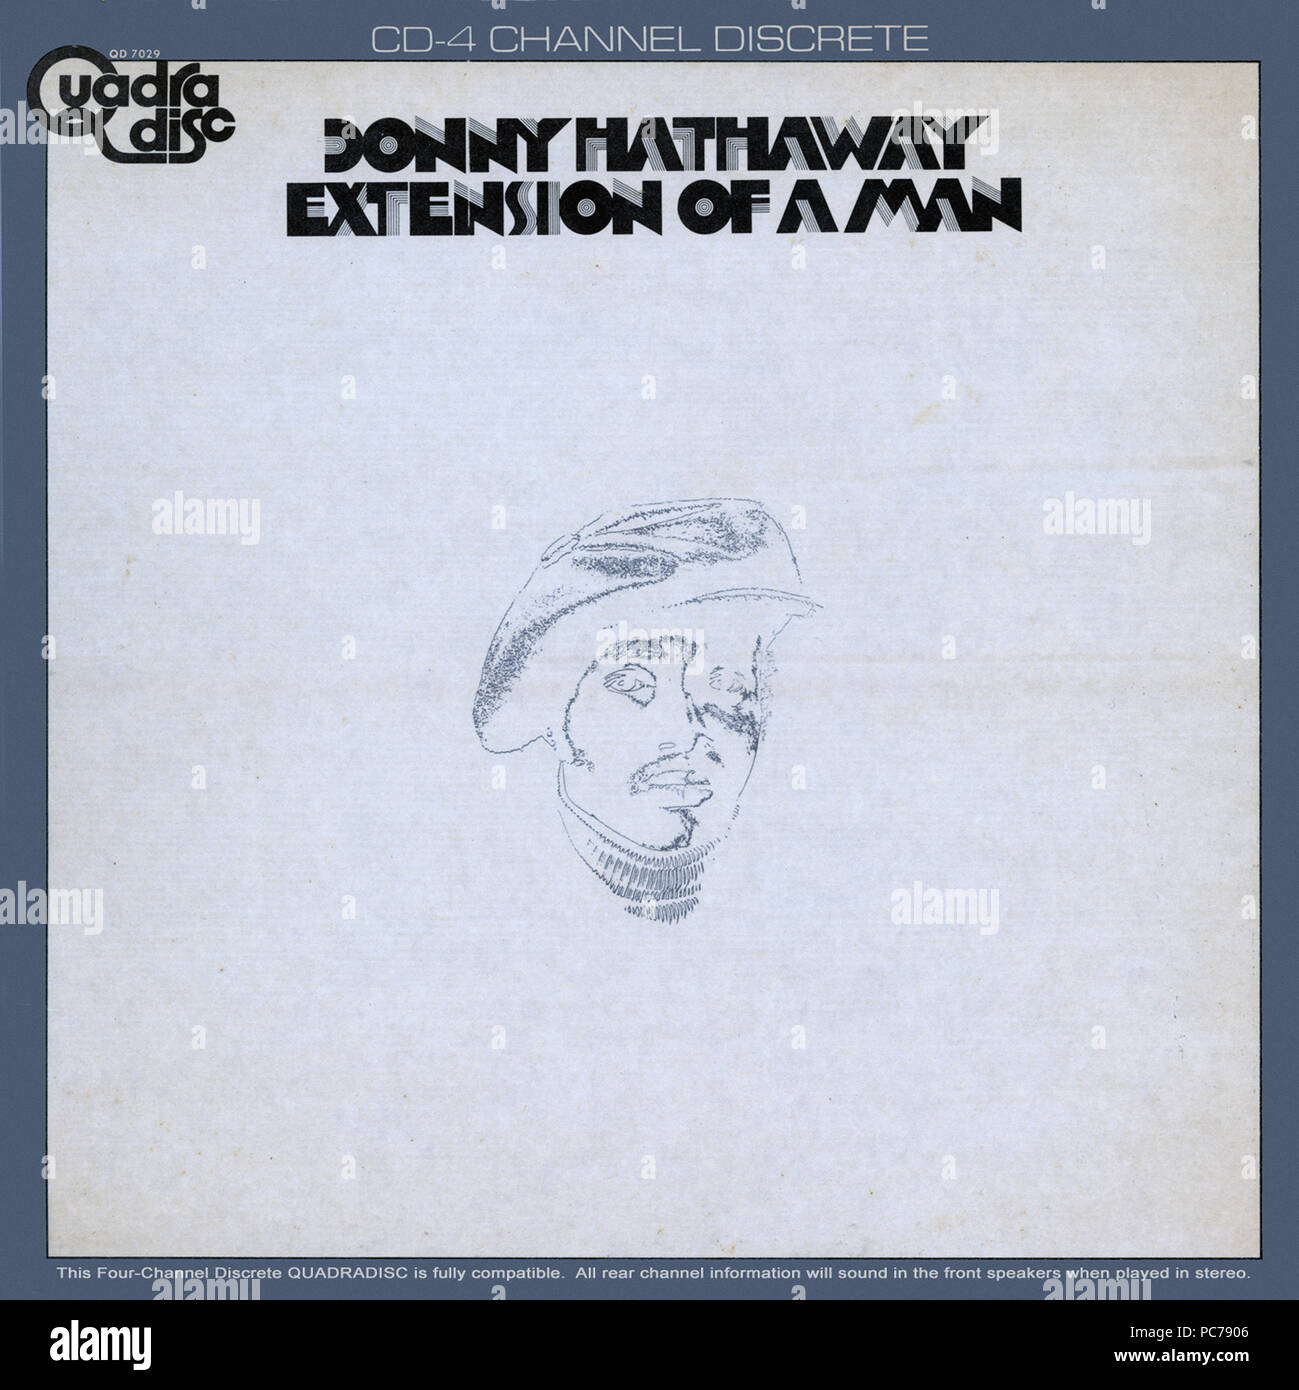 Donny Hathaway – Extension of a Man (Regular and Quad)  -  vintage vinyl cover album (Front) Stock Photo